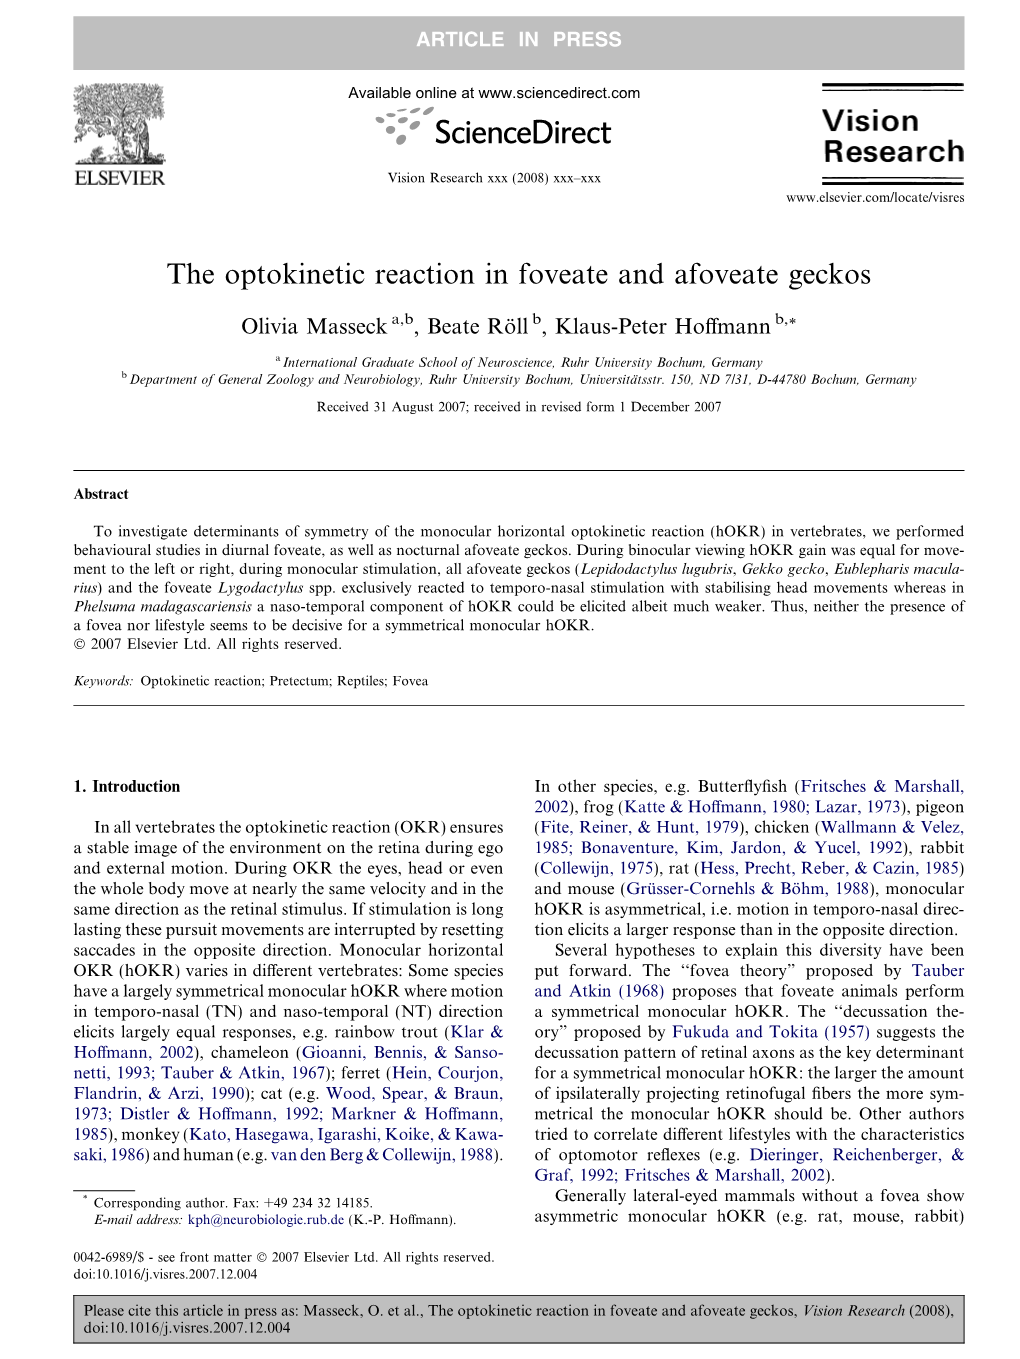 The Optokinetic Reaction in Foveate and Afoveate Geckos